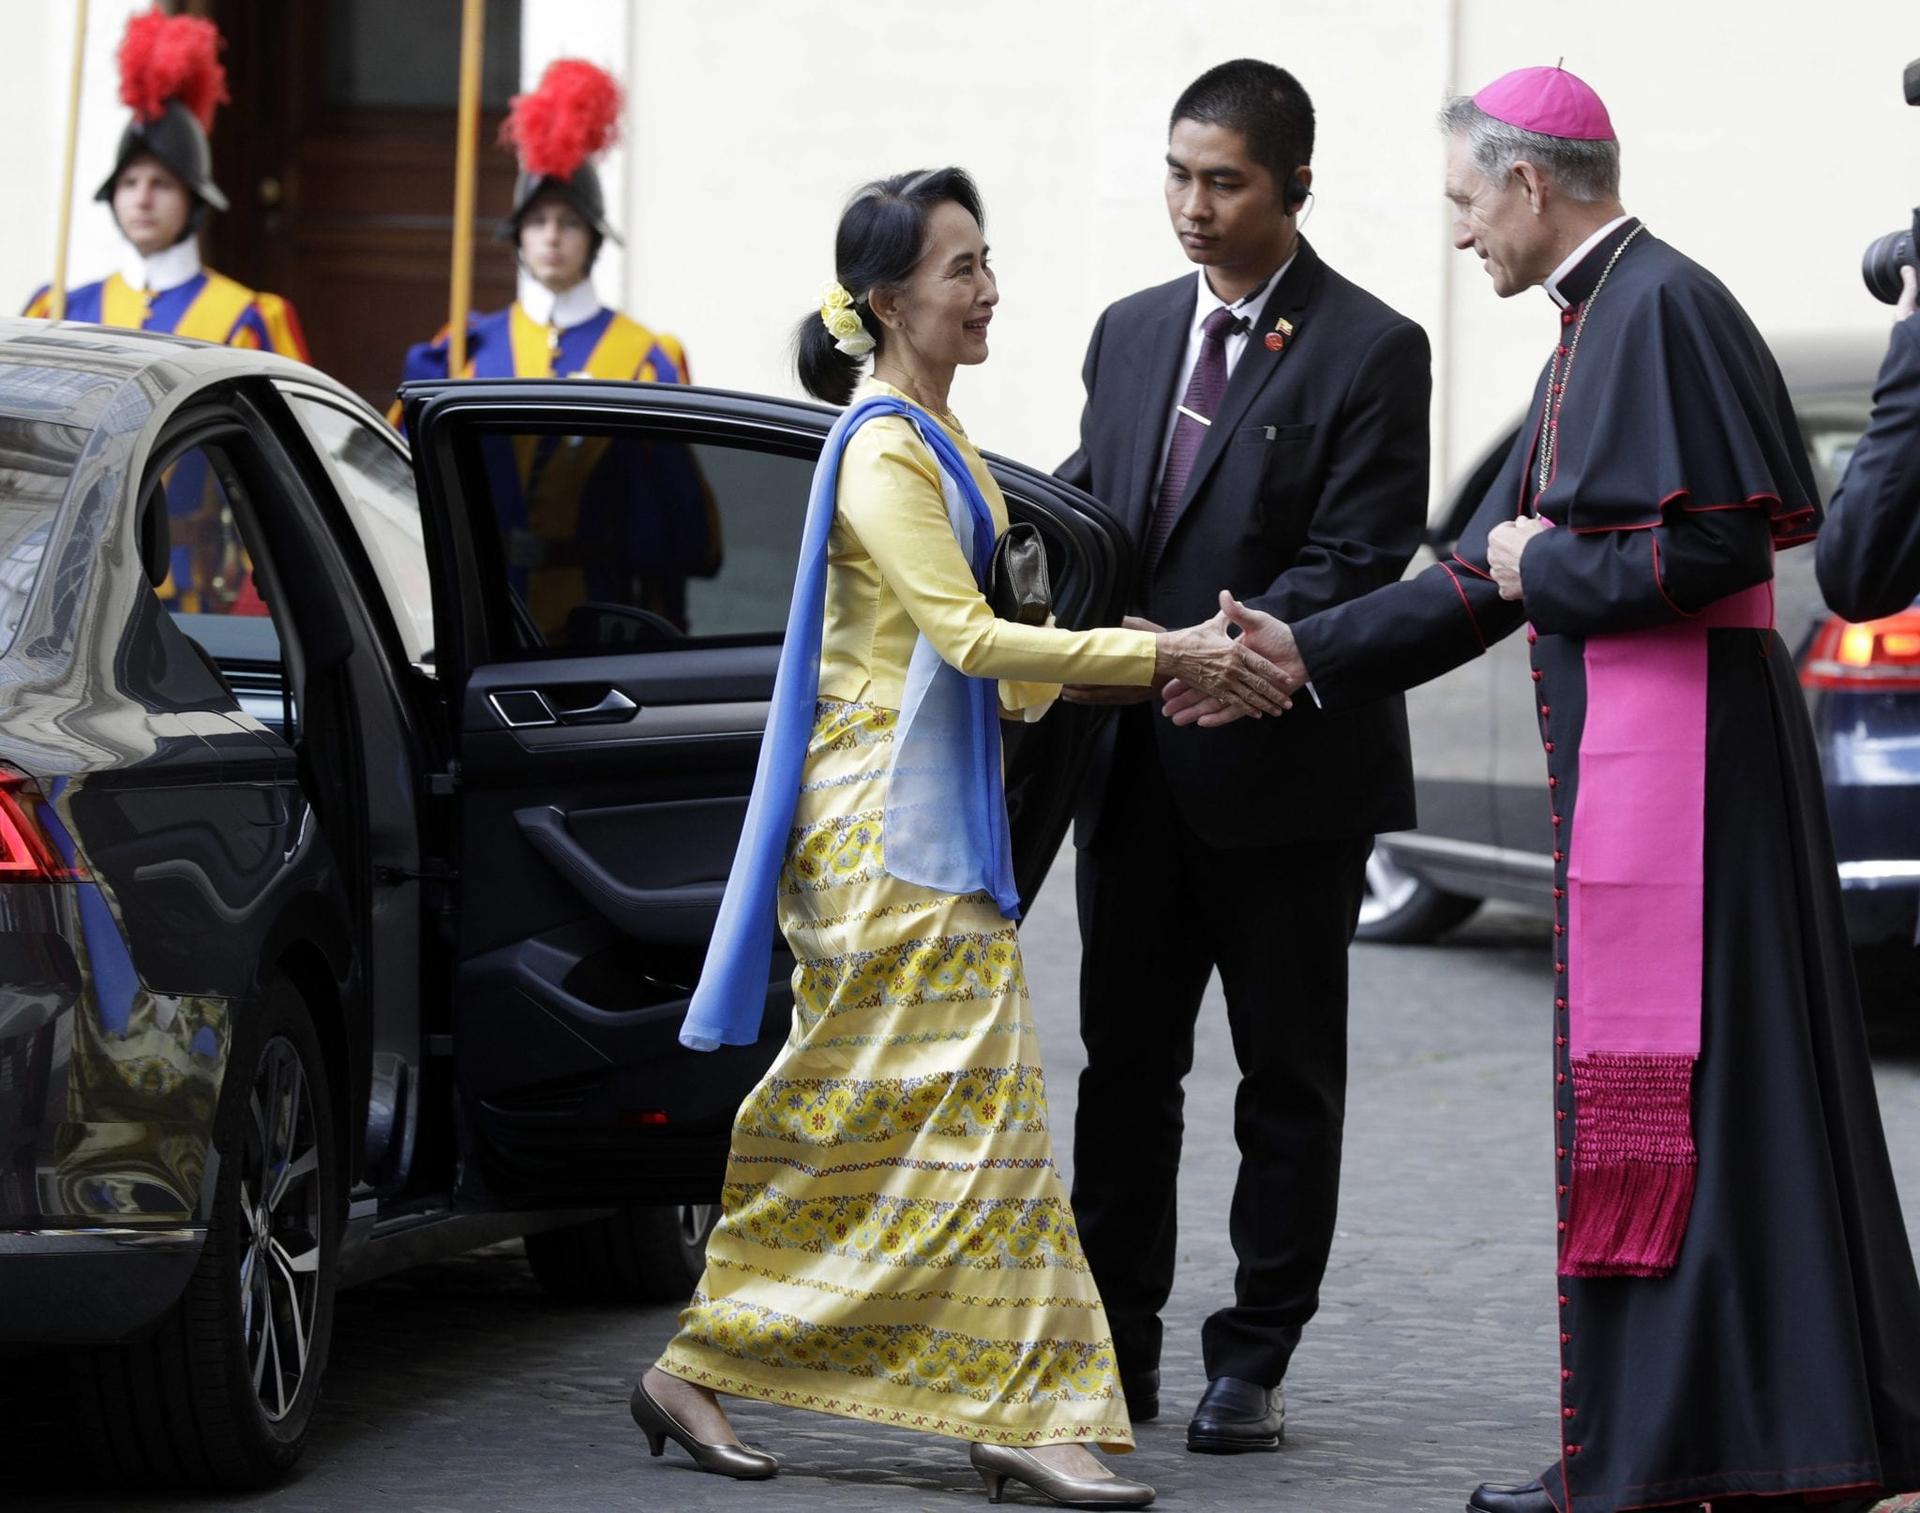 Pope’s meeting with Suu Kyi likely not all sweetness and light